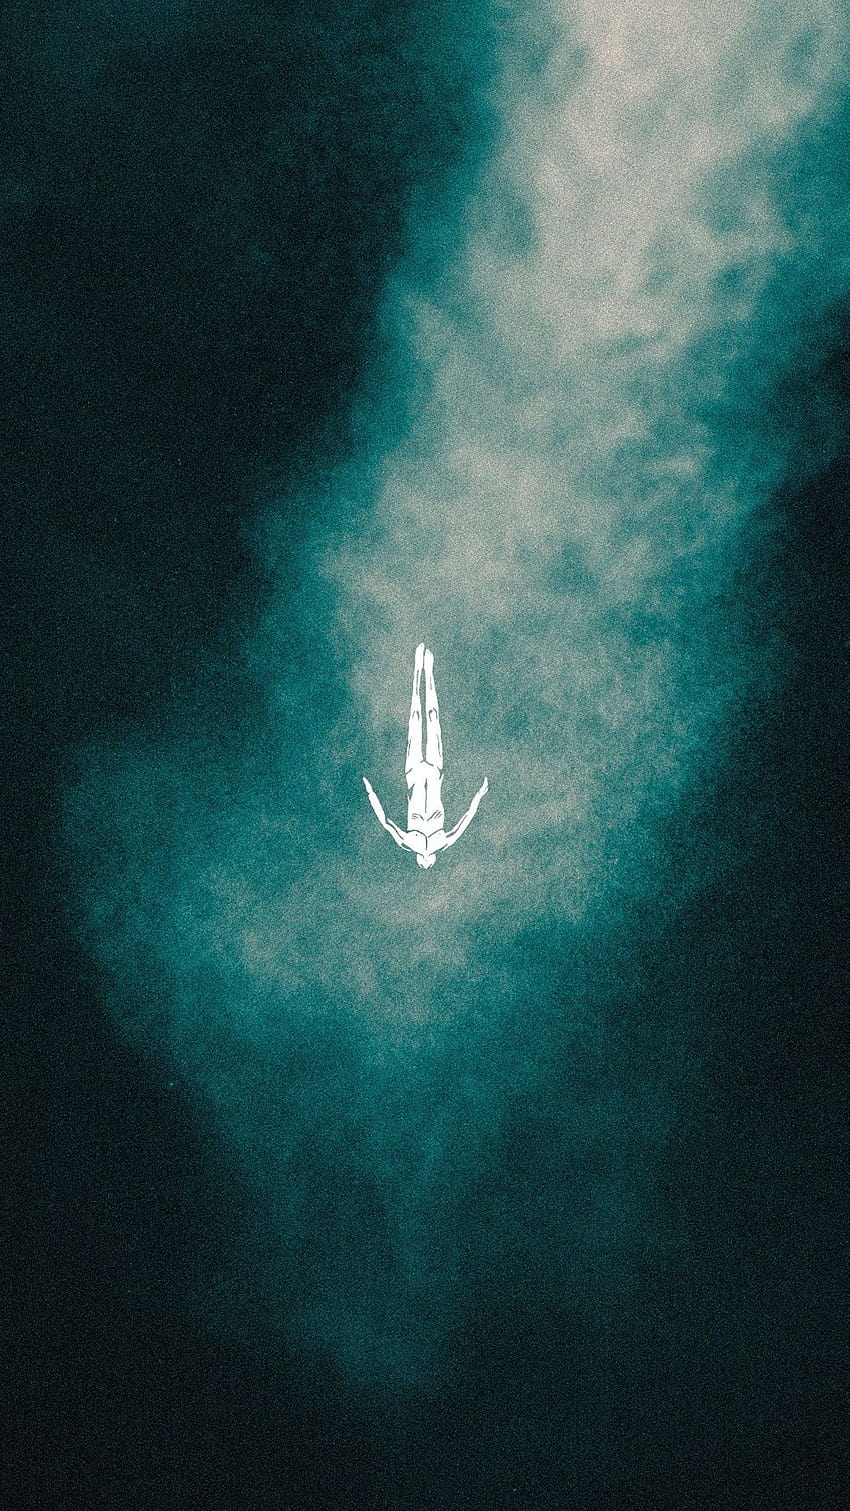 Afterlife, techno iphone HD phone wallpaper